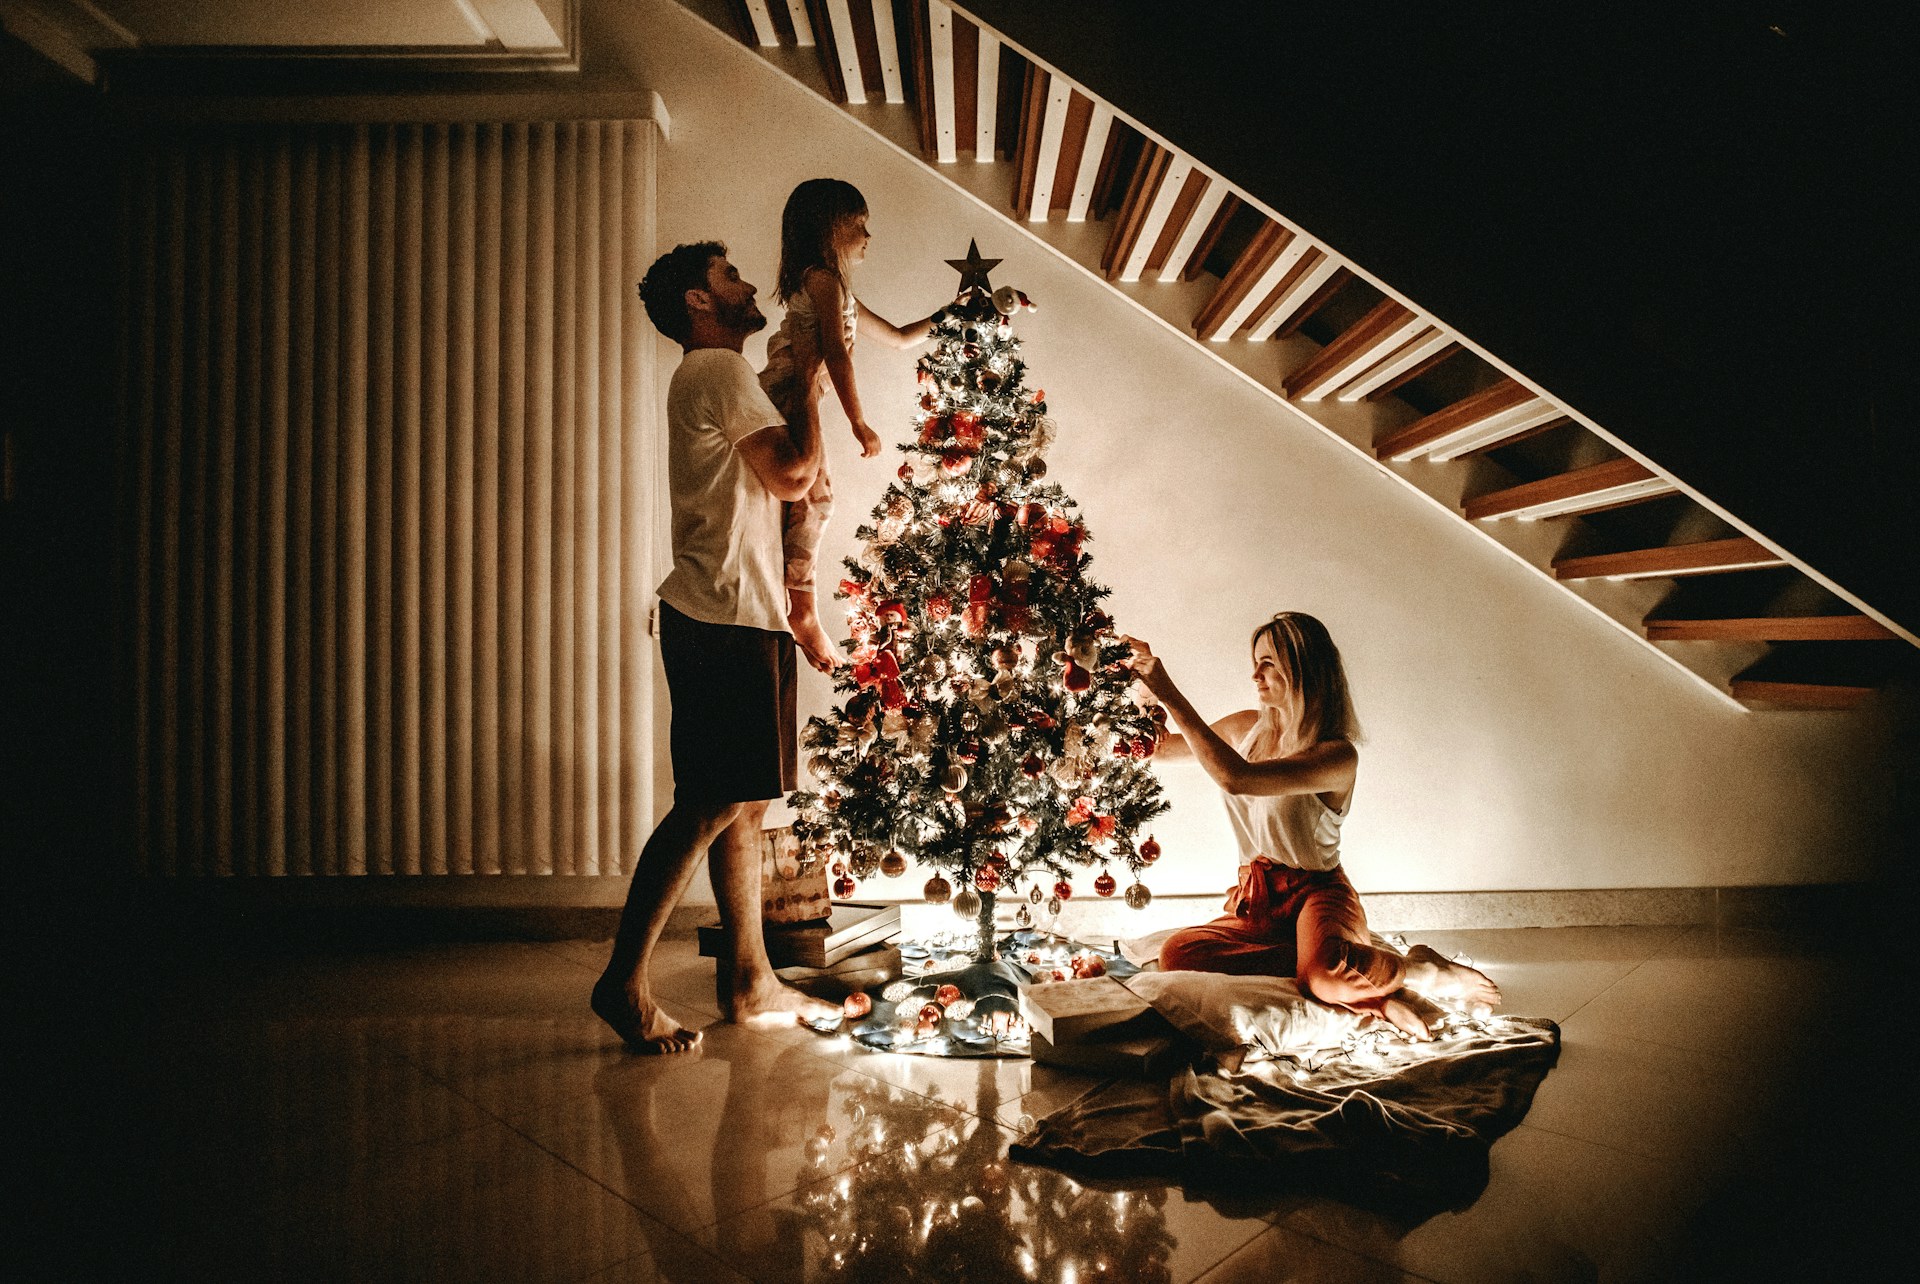 parents and a young child decorating a Christmas tree